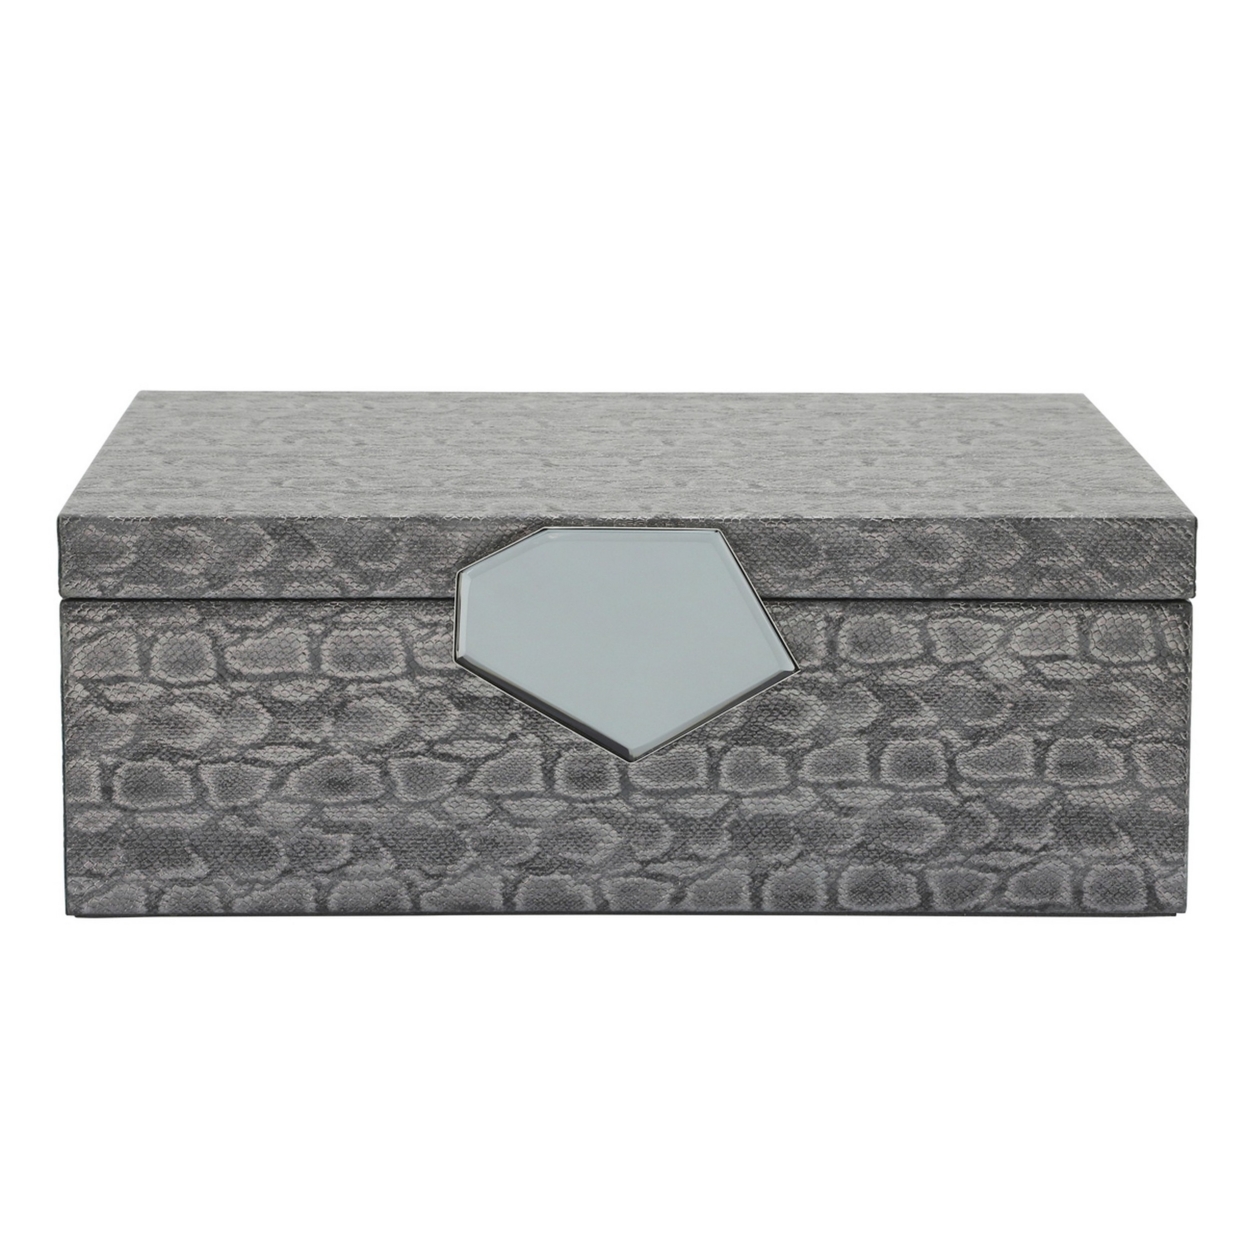 14 Inch Box With Leatherette Upholstery And Textured Pattern, Gray- Saltoro Sherpi